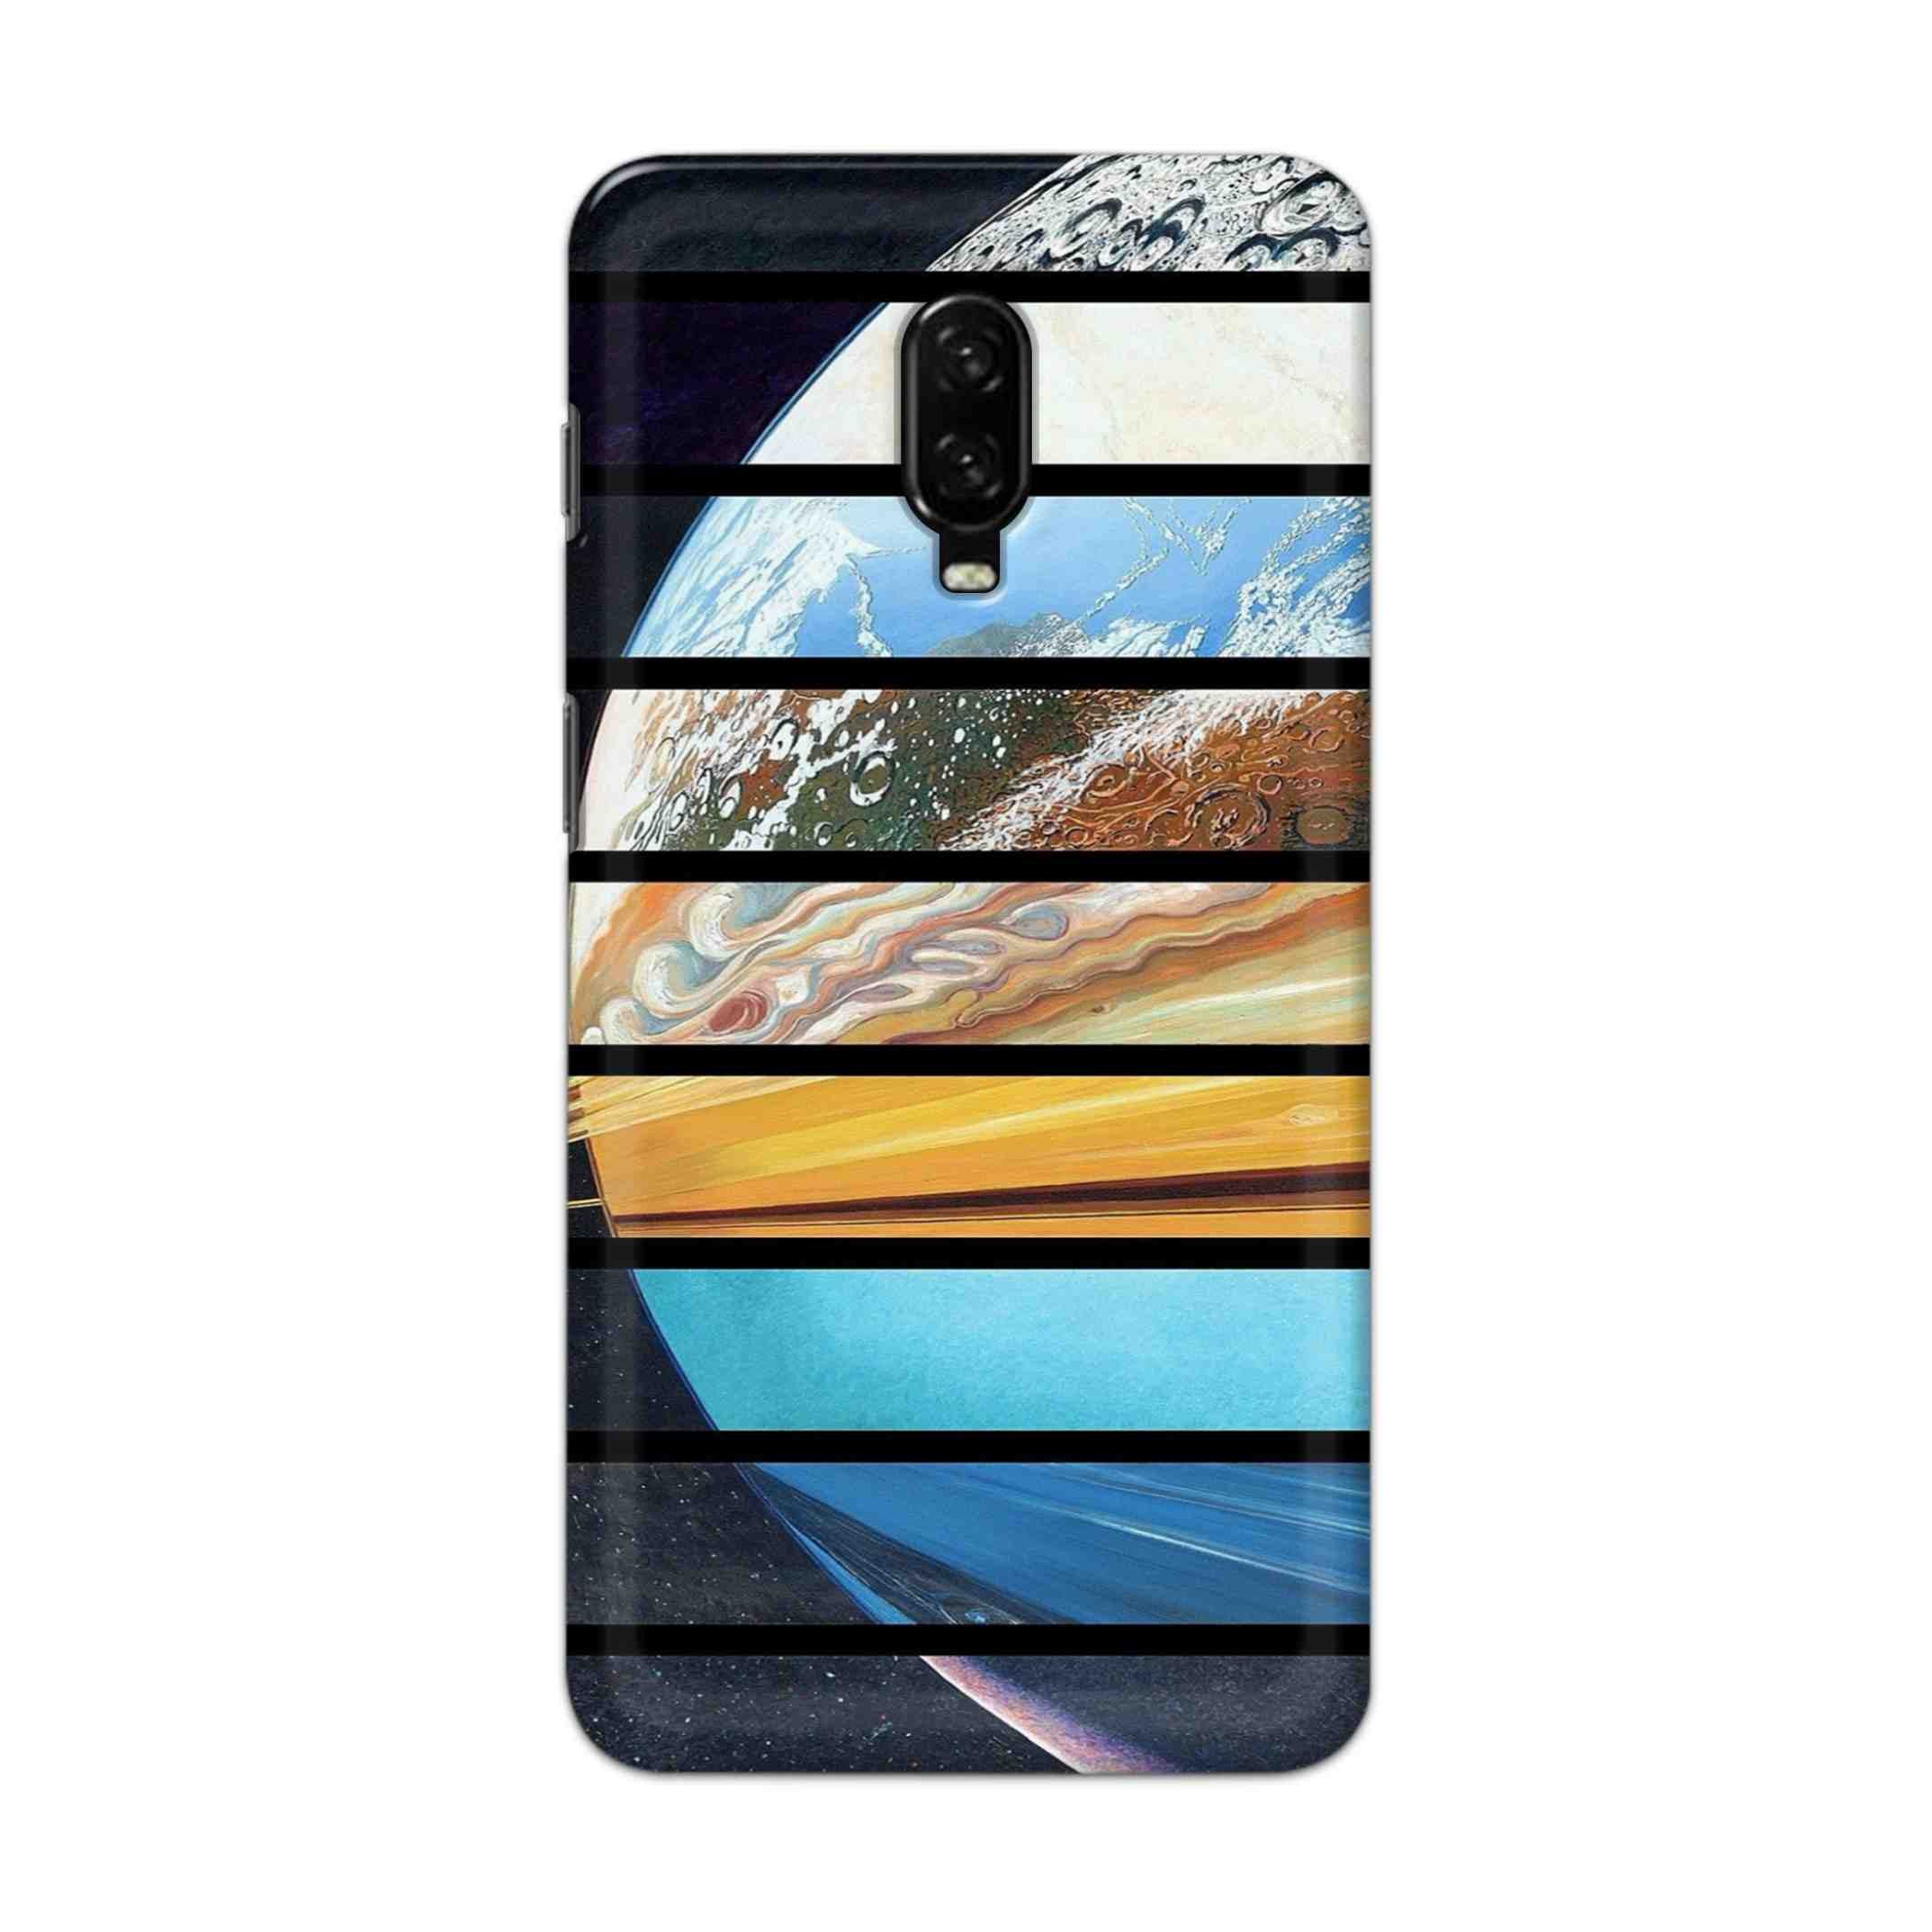 Buy Colourful Earth Hard Back Mobile Phone Case Cover For OnePlus 6T Online